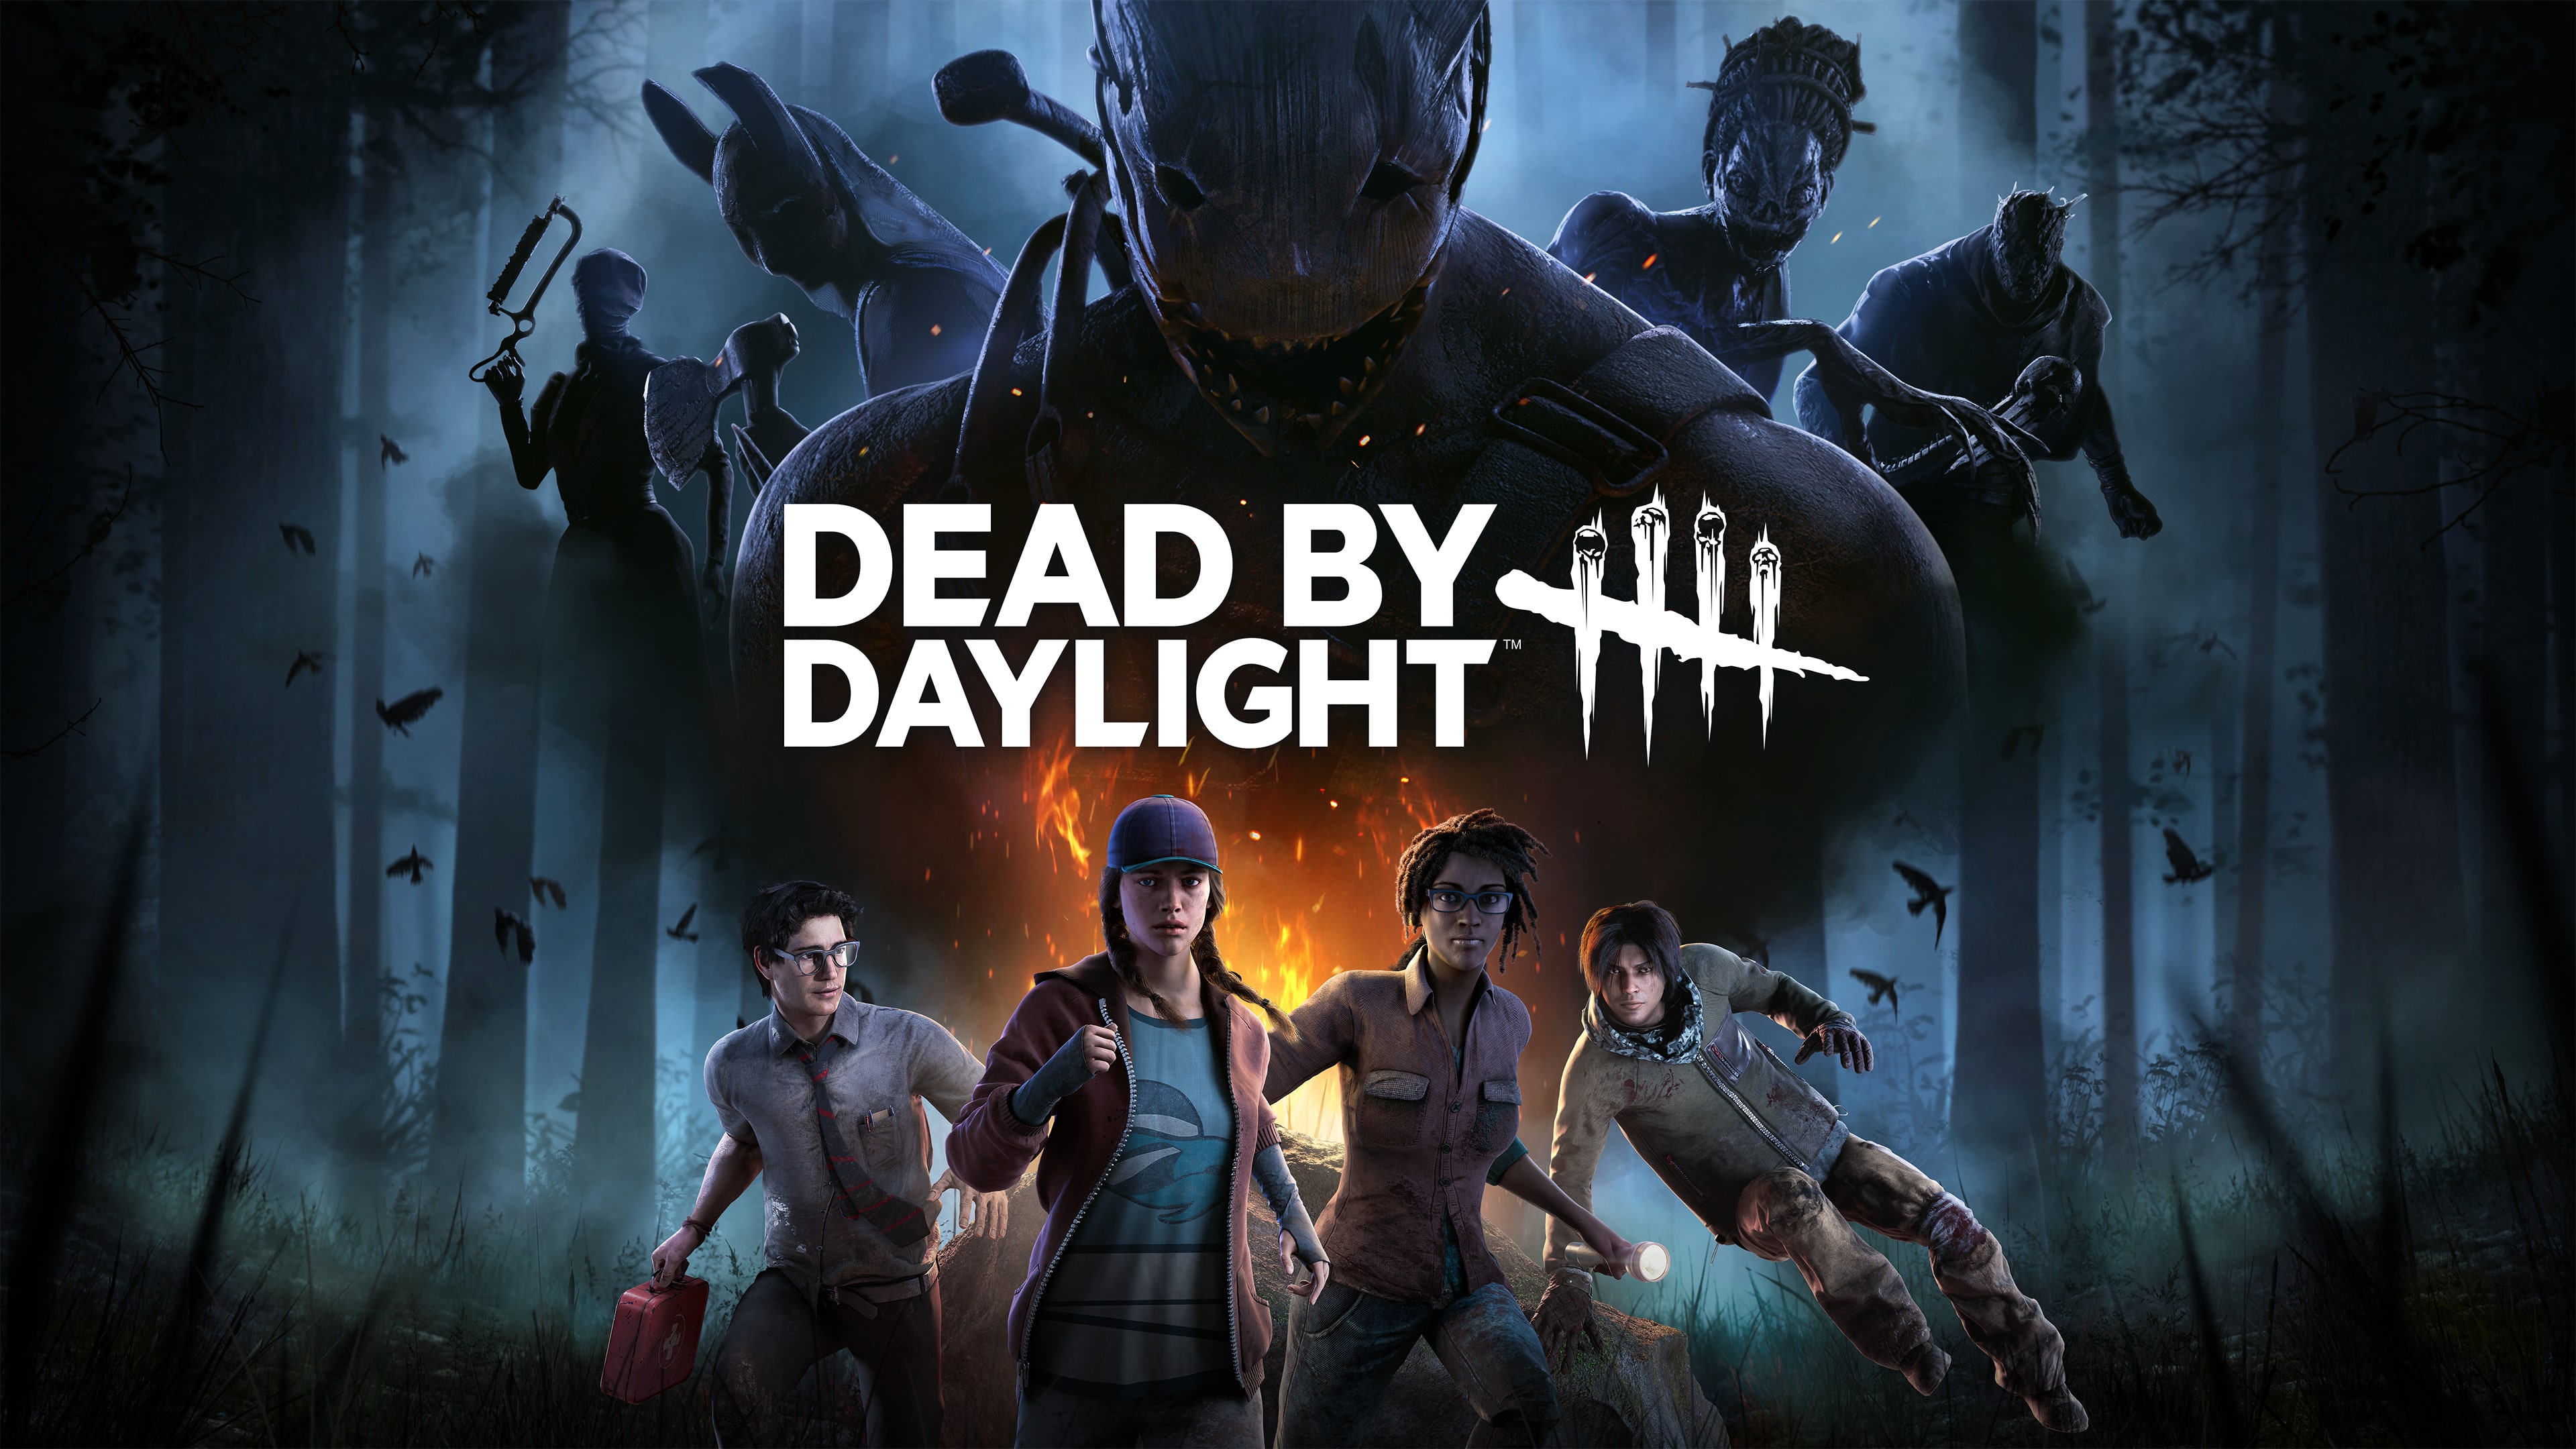 Dead by Daylight: Special Edition PS4™ & PS5™ (Simplified Chinese, English, Korean, Japanese, Traditional Chinese)